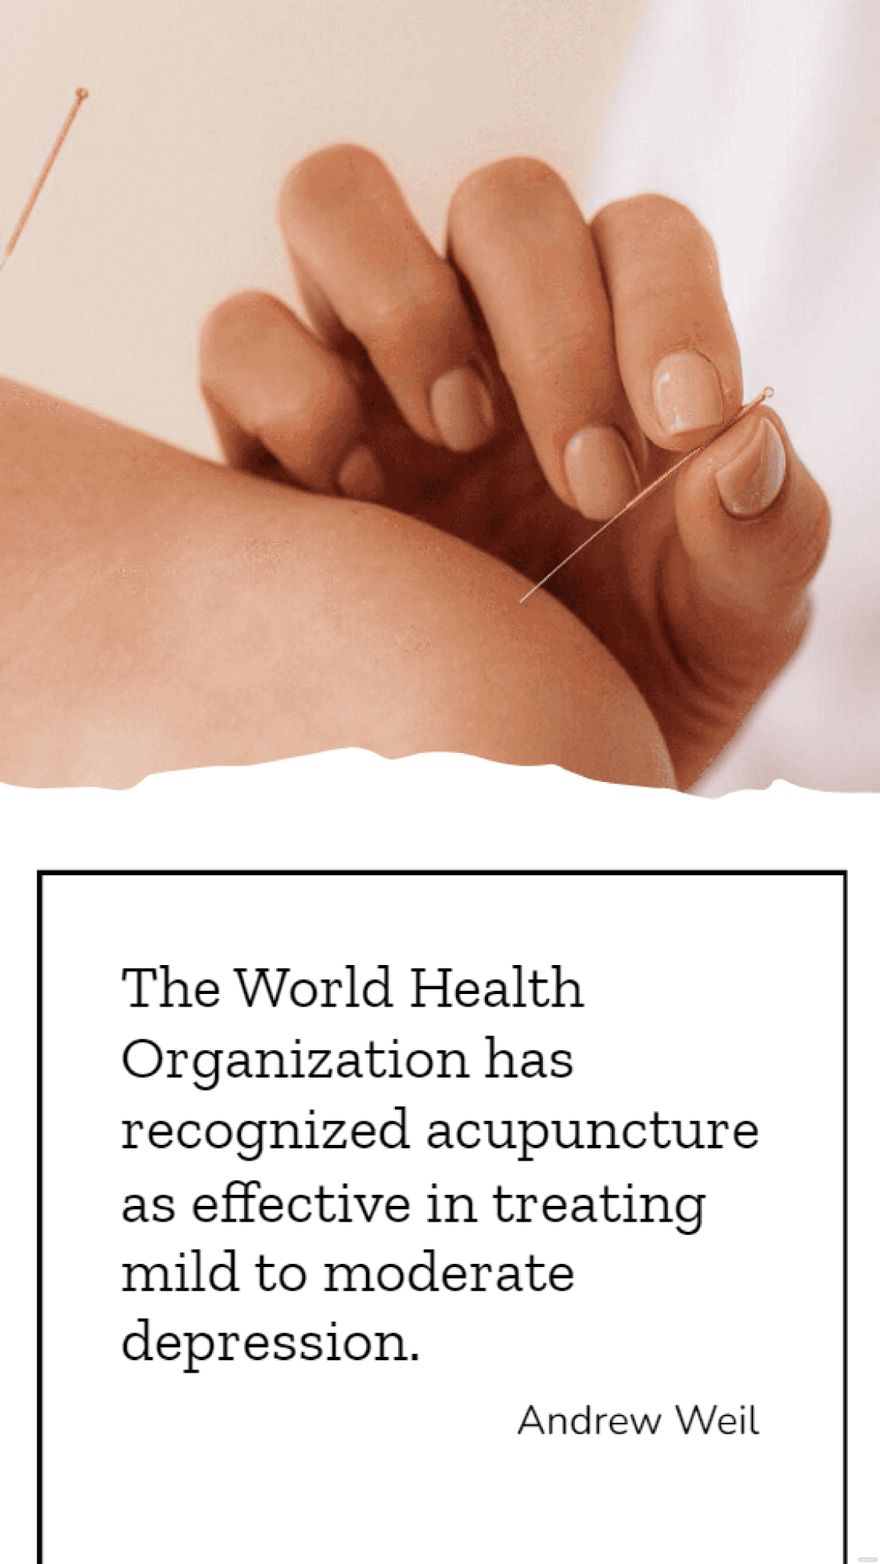 Andrew Weil - The World Health Organization has recognized acupuncture as effective in treating mild to moderate depression.